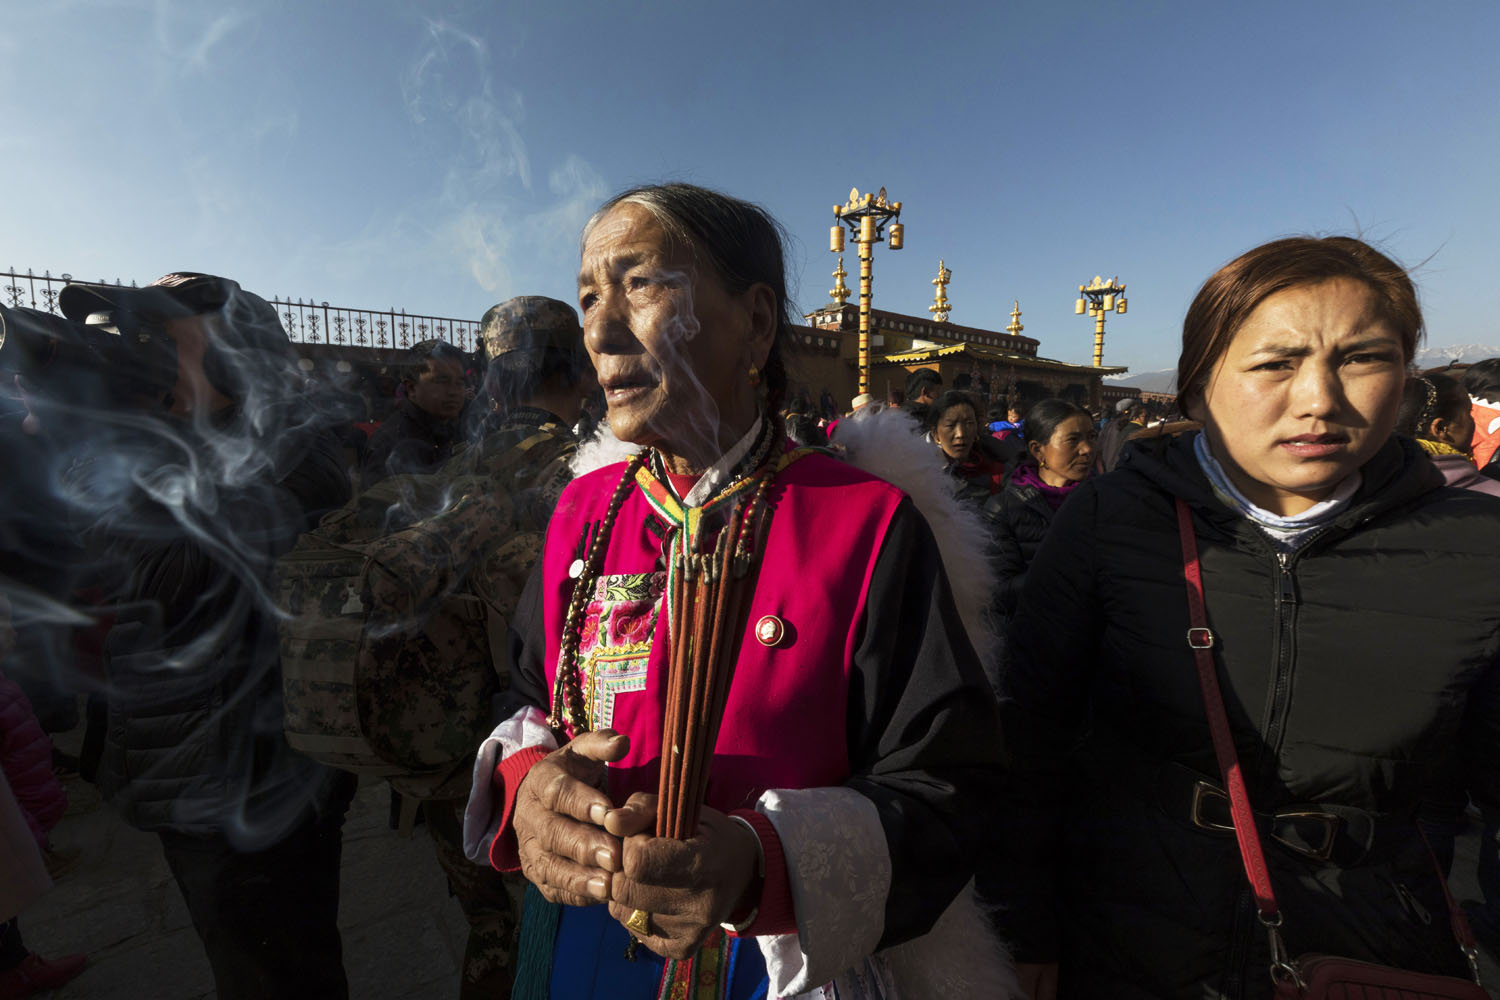 Woman dressed in traditional Tibetan clothing chants while holding burning incense at SongZangLin Monastery in JingXiang Village. Yunnan, China. March 2, 2018.